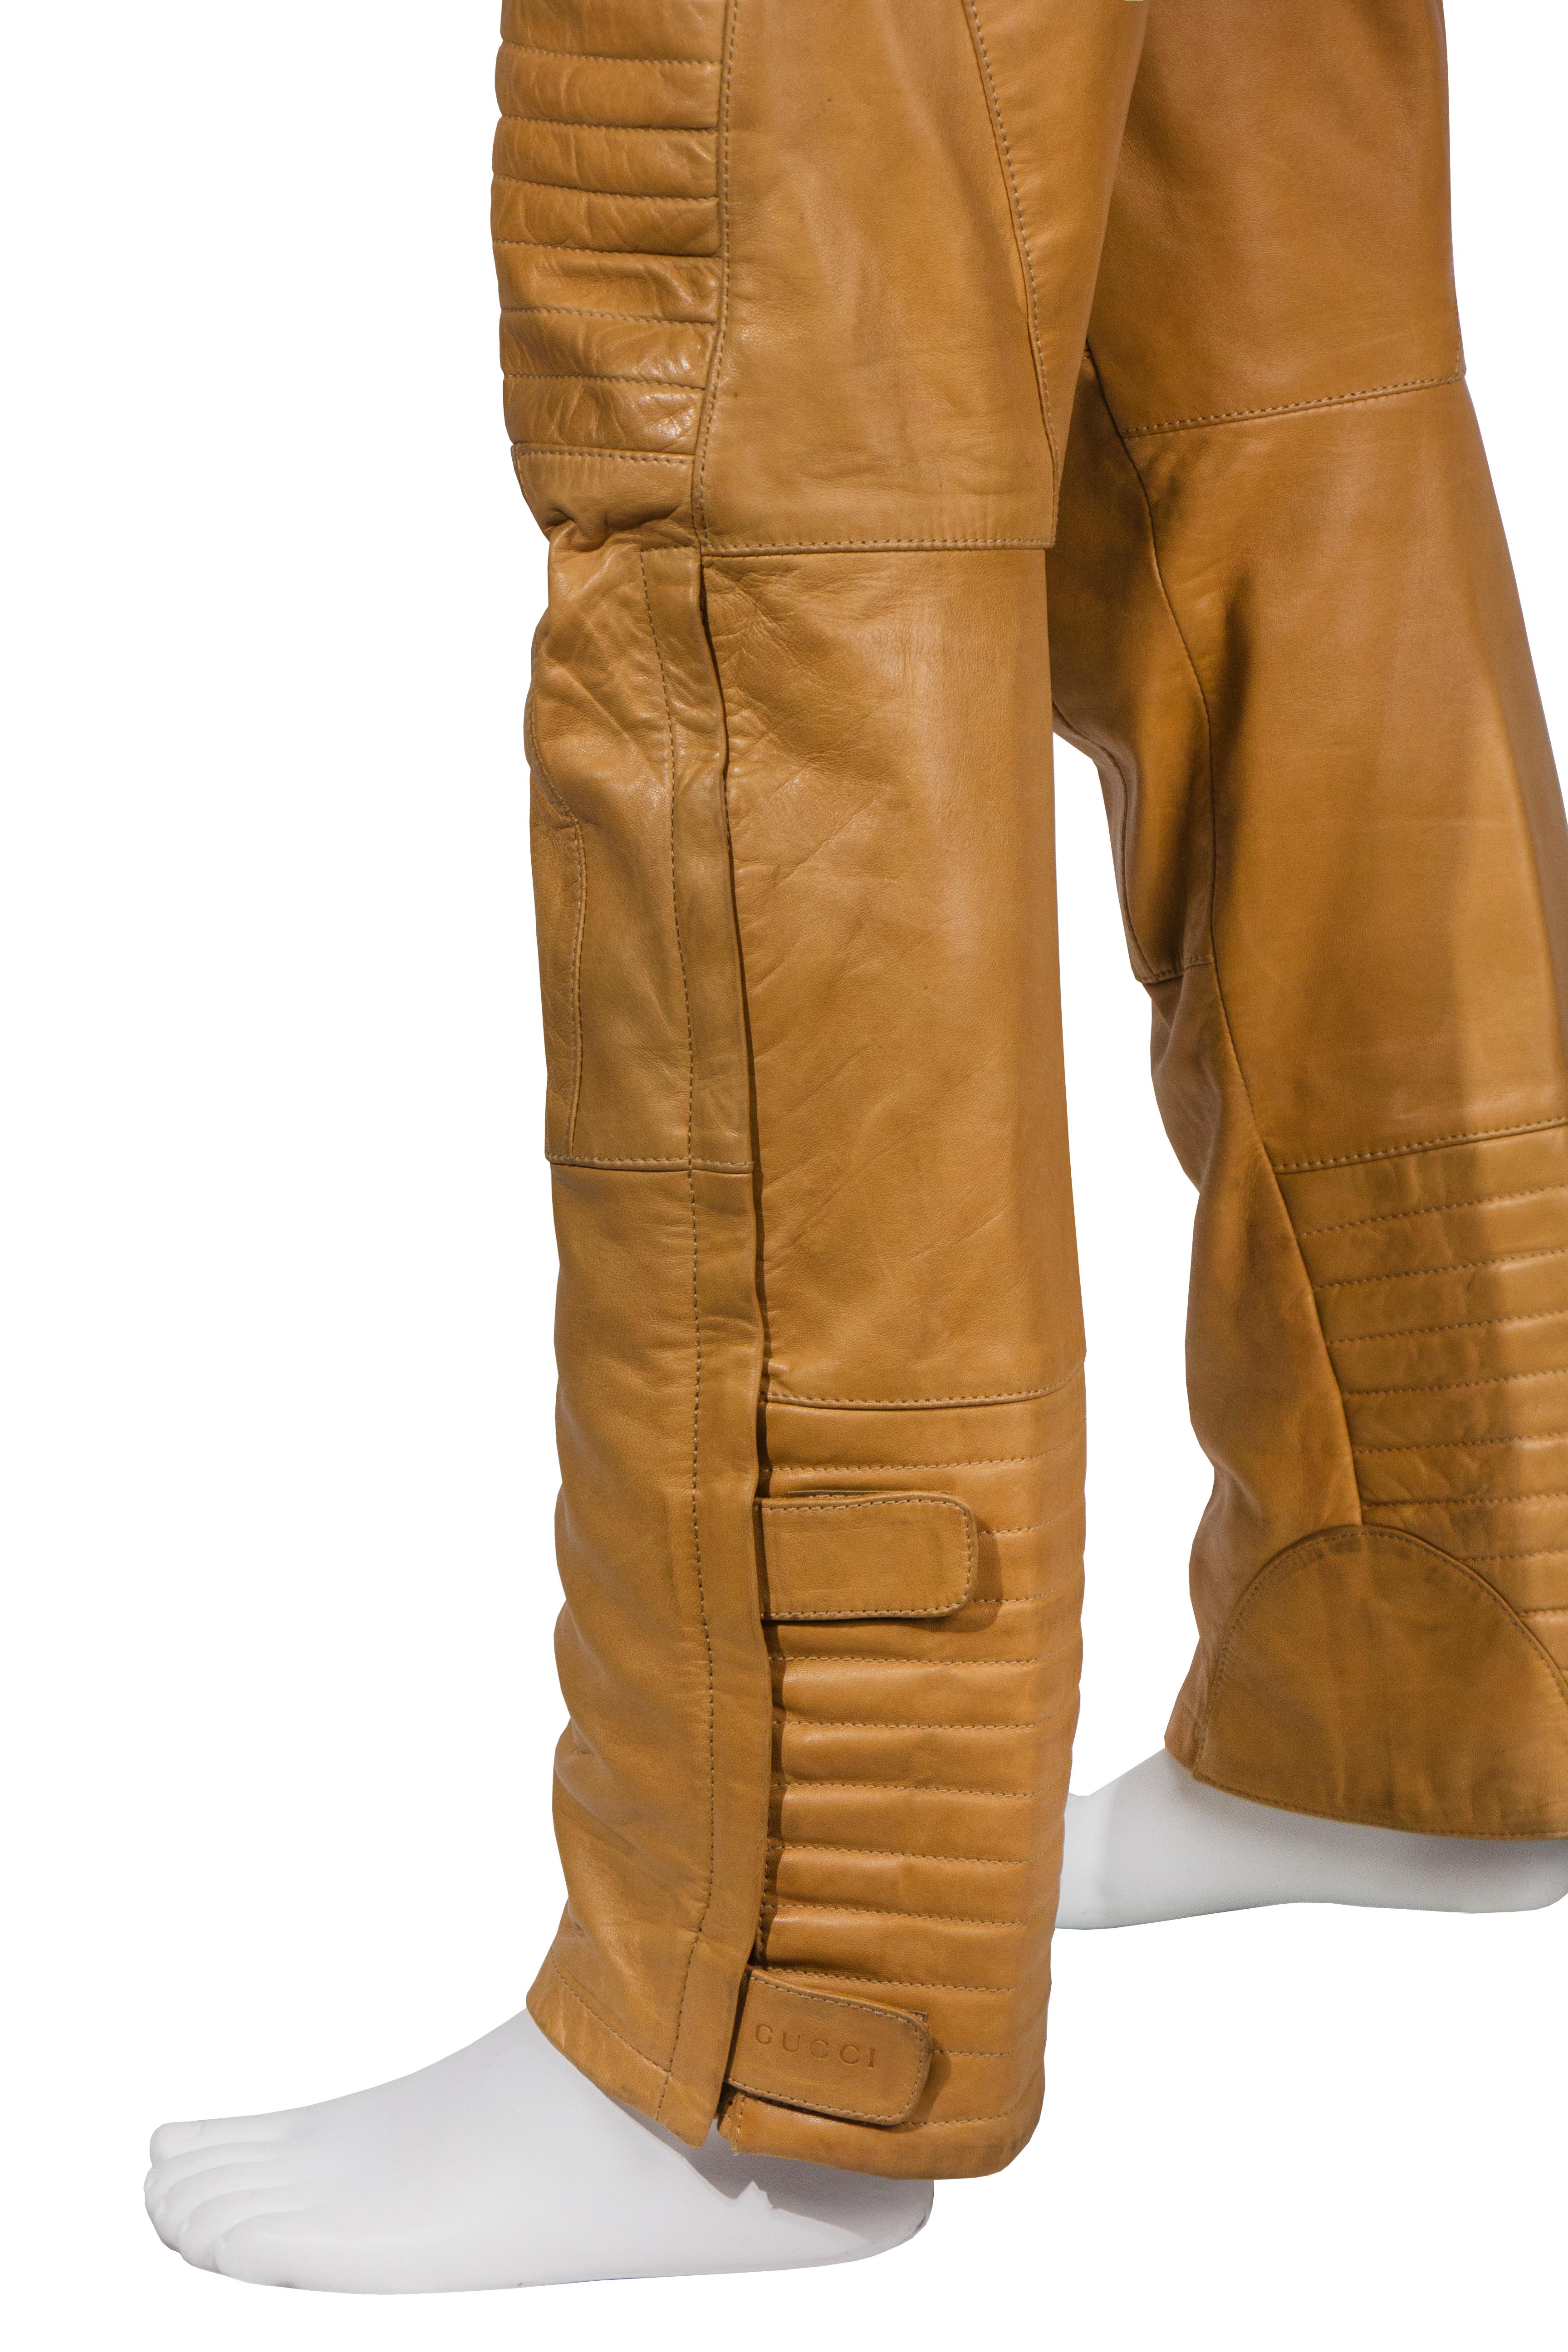 Gucci by Tom Ford men's tan leather motorcycle pants, fw 2000 For Sale 4